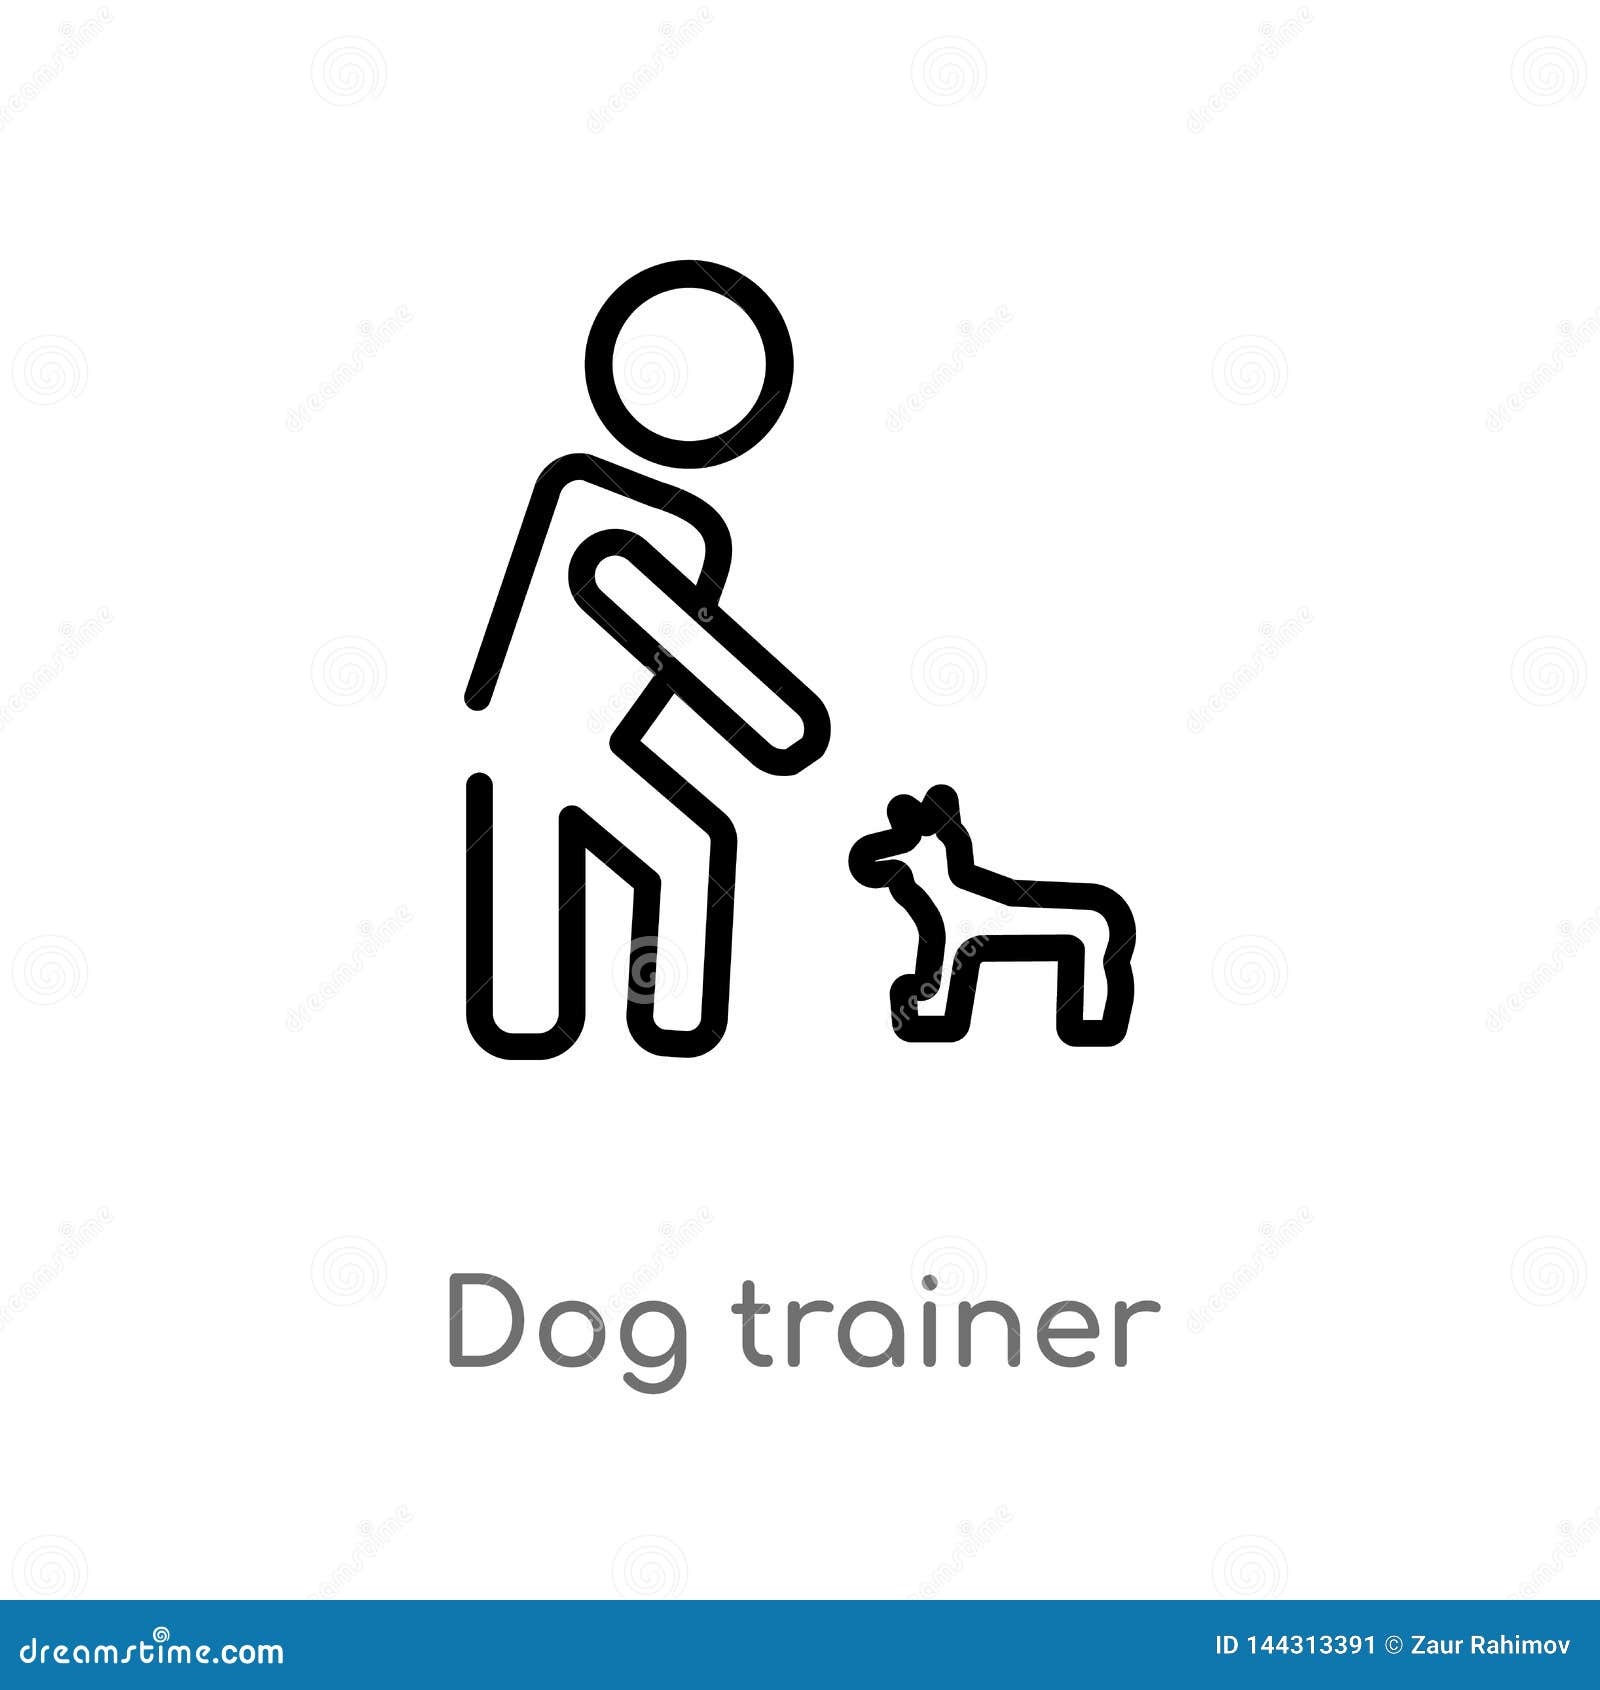 Outline Dog Trainer Vector Icon. Isolated Black Simple Line Element